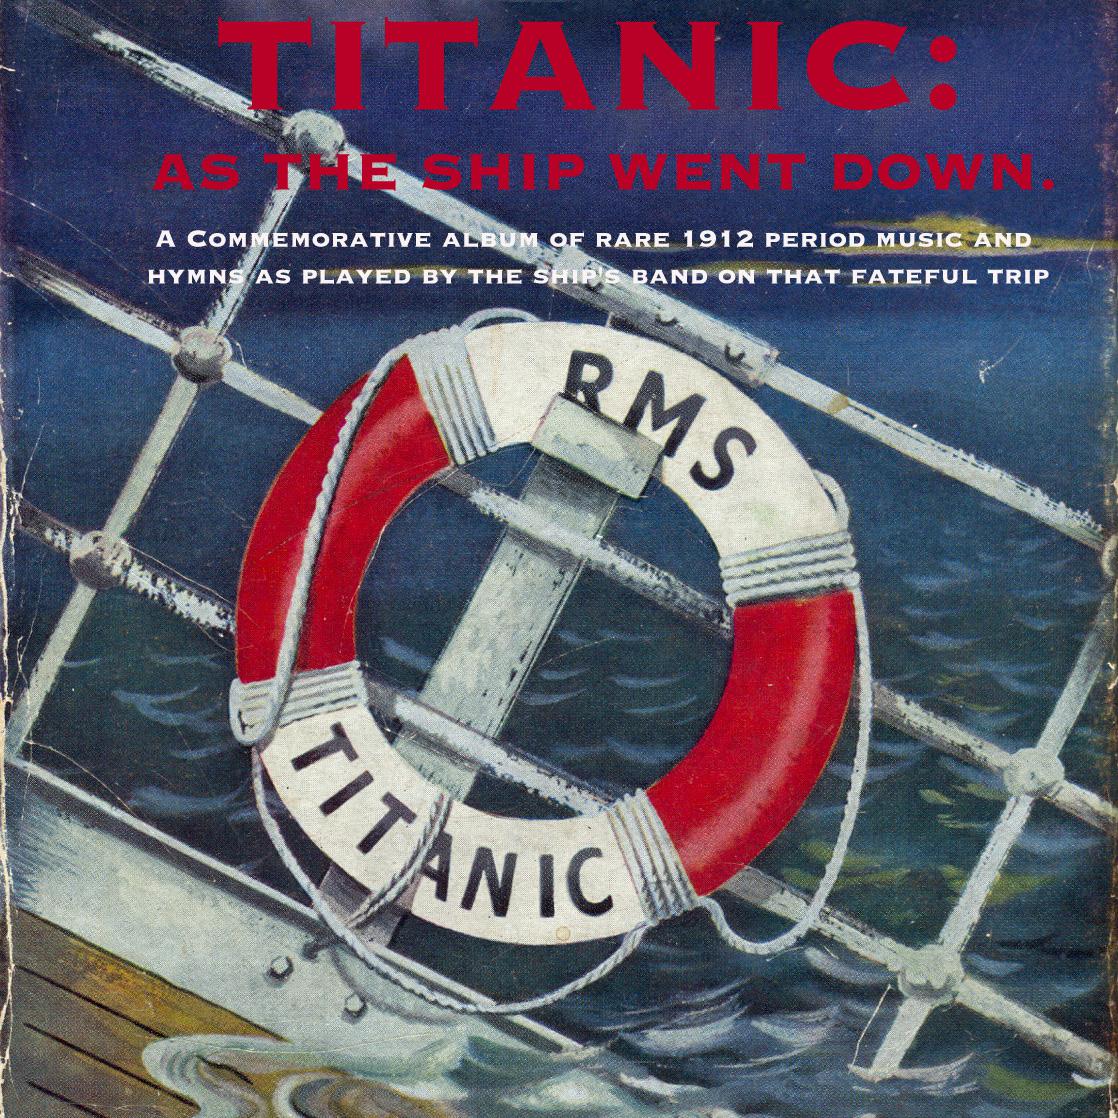 Titanic: As the Ship Went Down. A Commemorative Album of Rare 1912 Period Music and Hymns Played by the Ship'